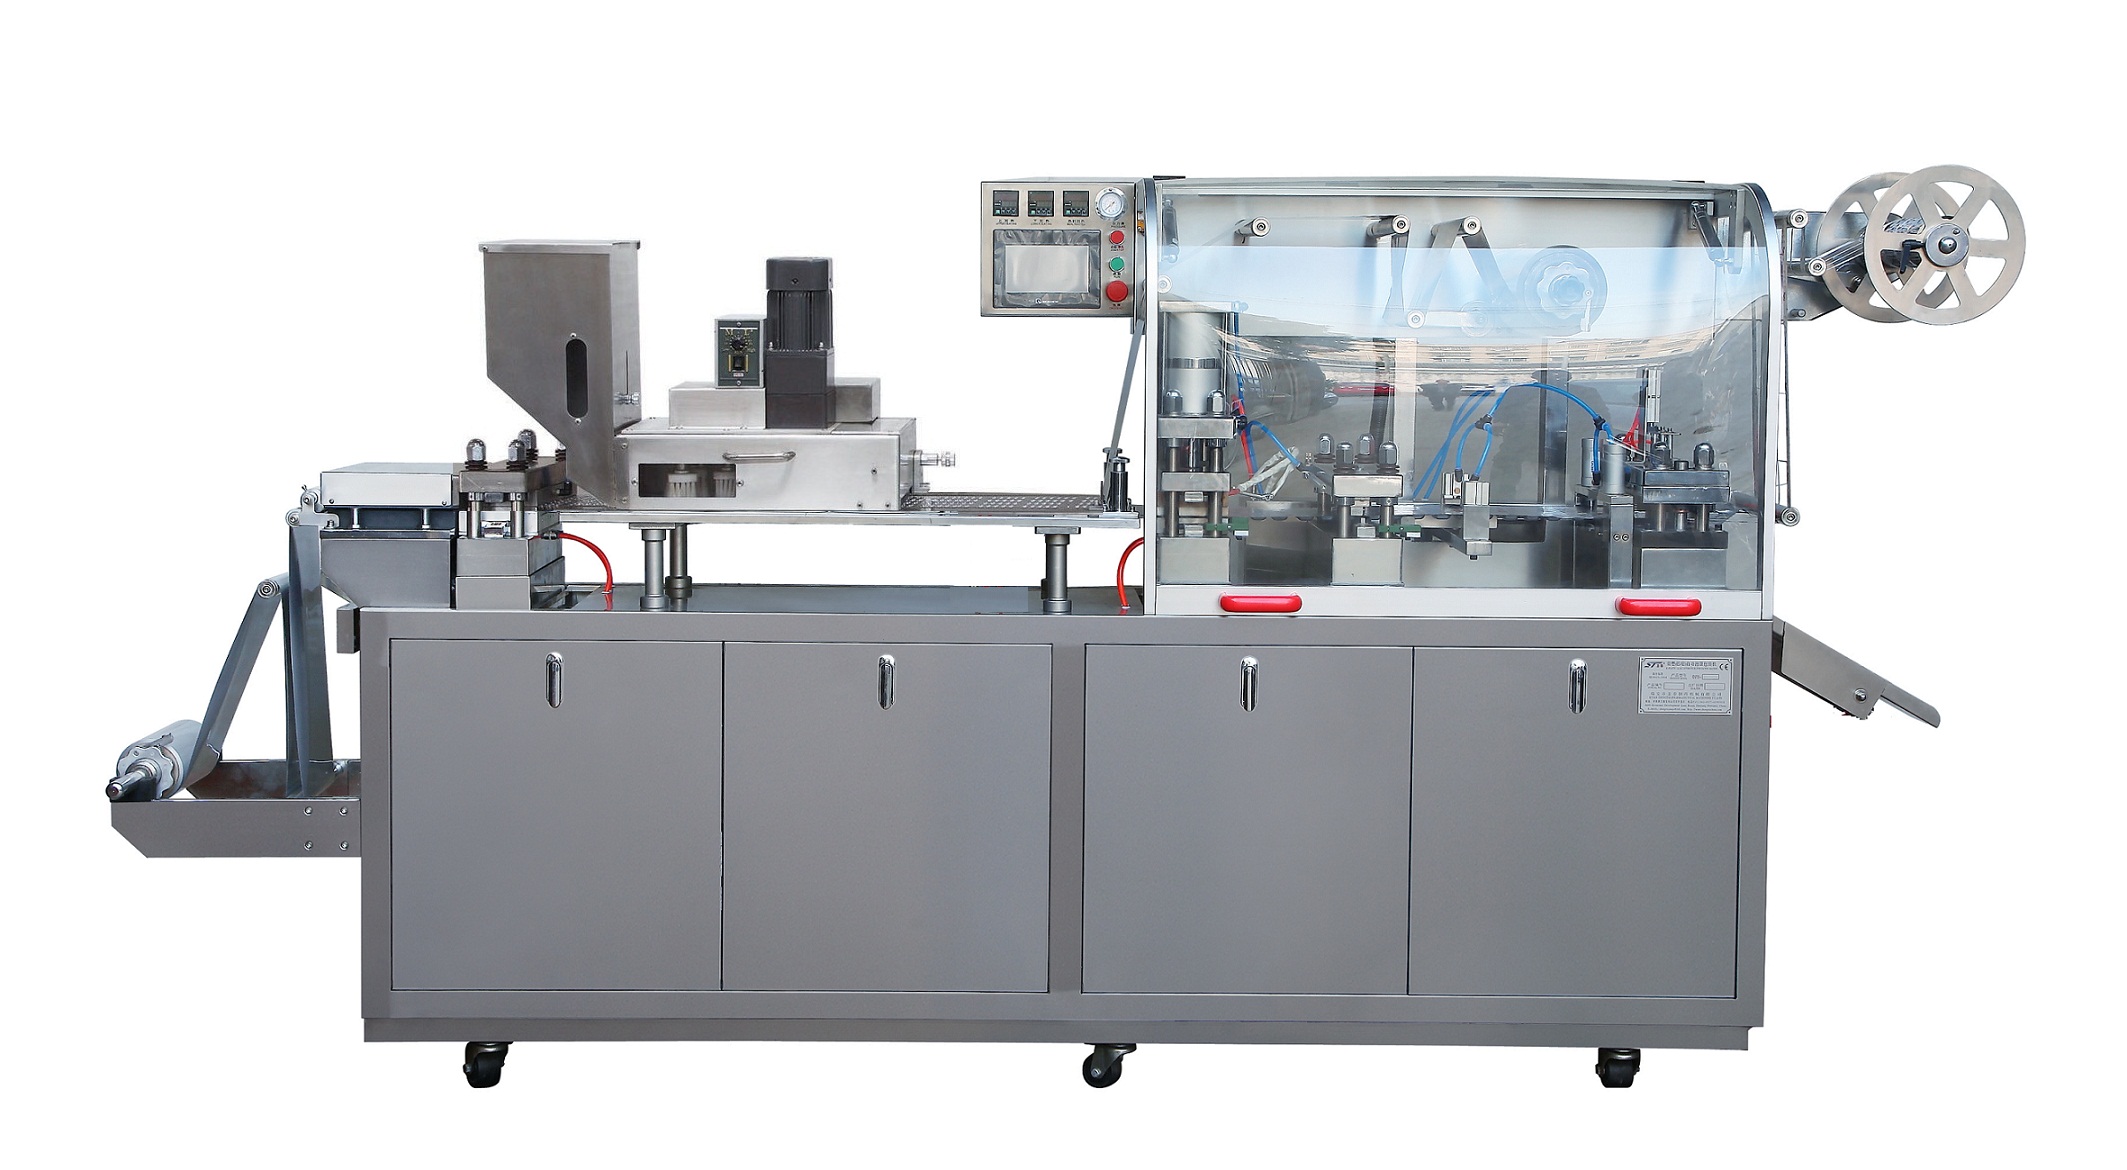 The rise of blister packaging machines escorts drug safety